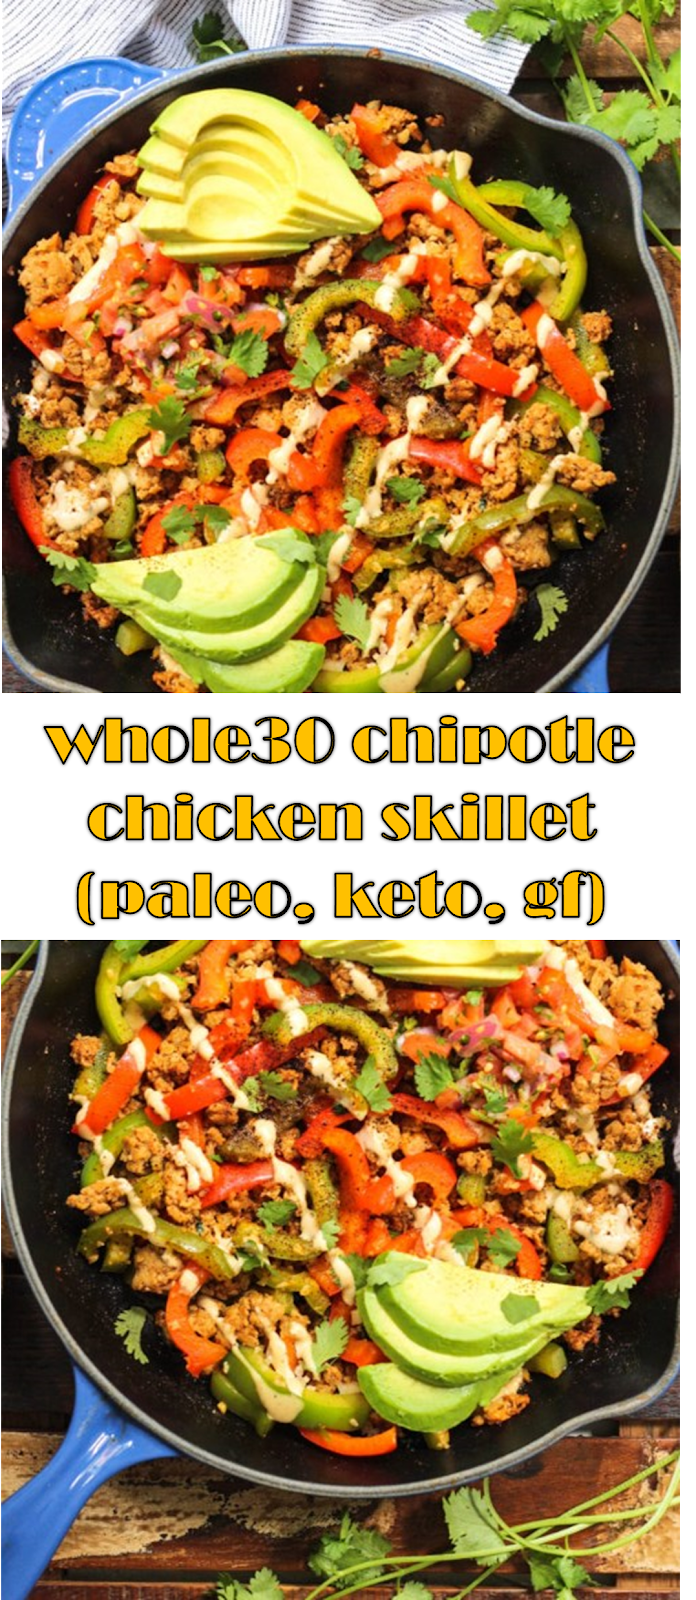 883 Reviews: #Best #Recipe >>> whole30 chipotle #chicken skillet (paleo ...